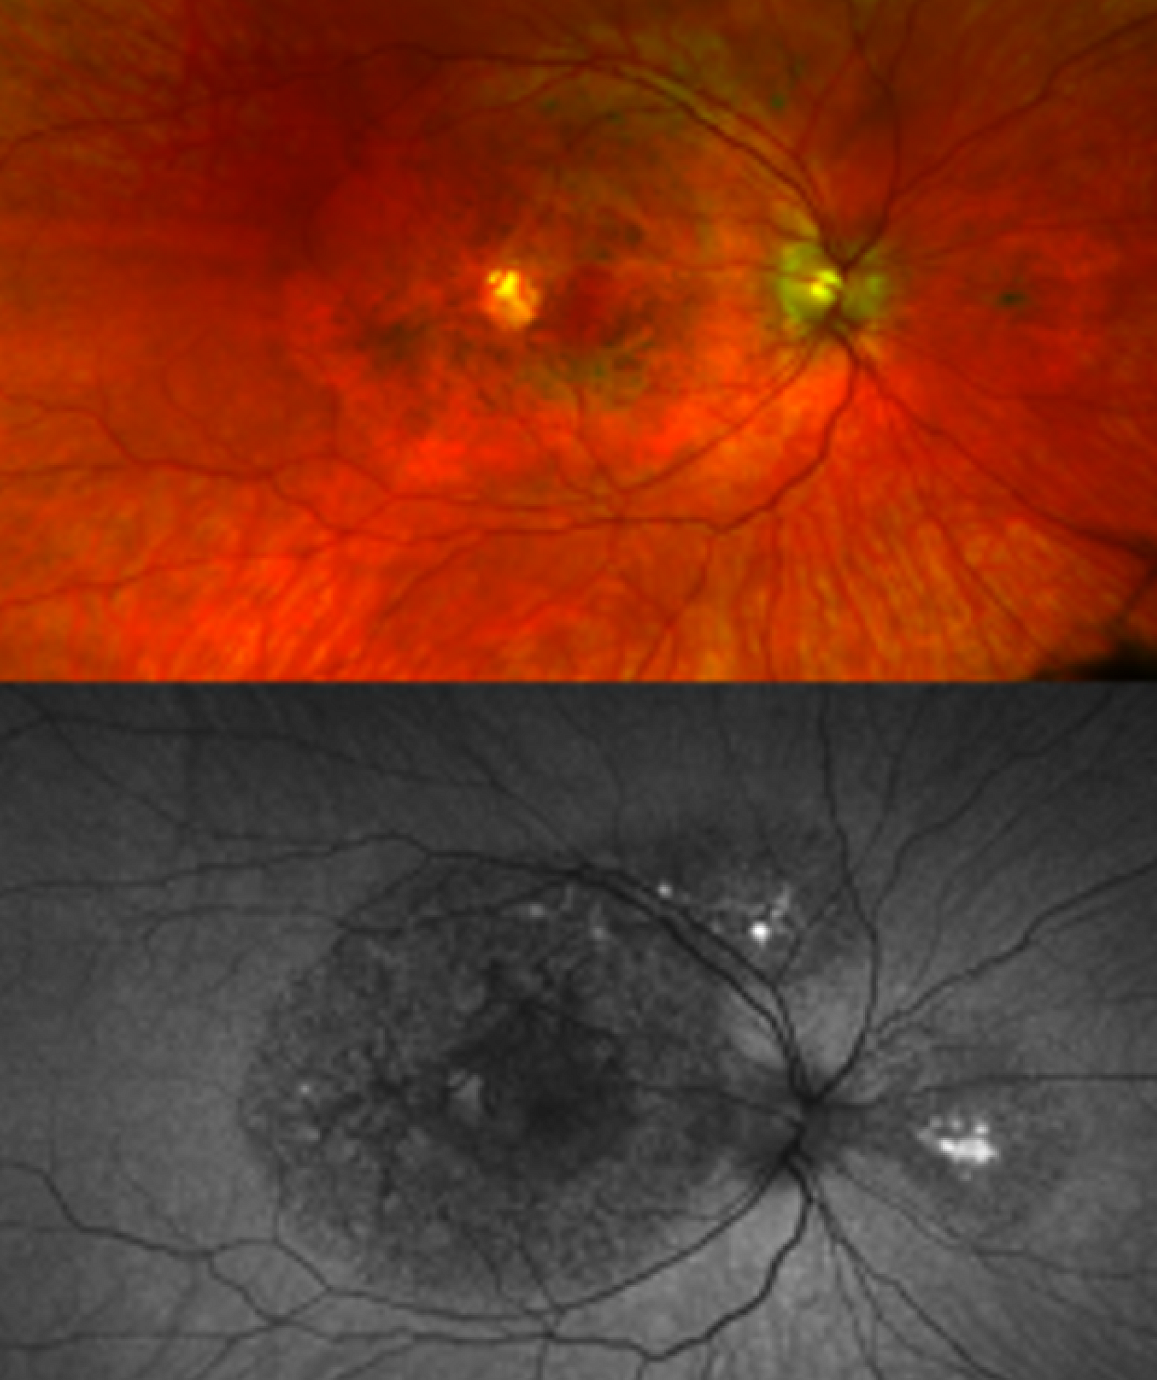 New genetic eye disease discovered by NIH researchers